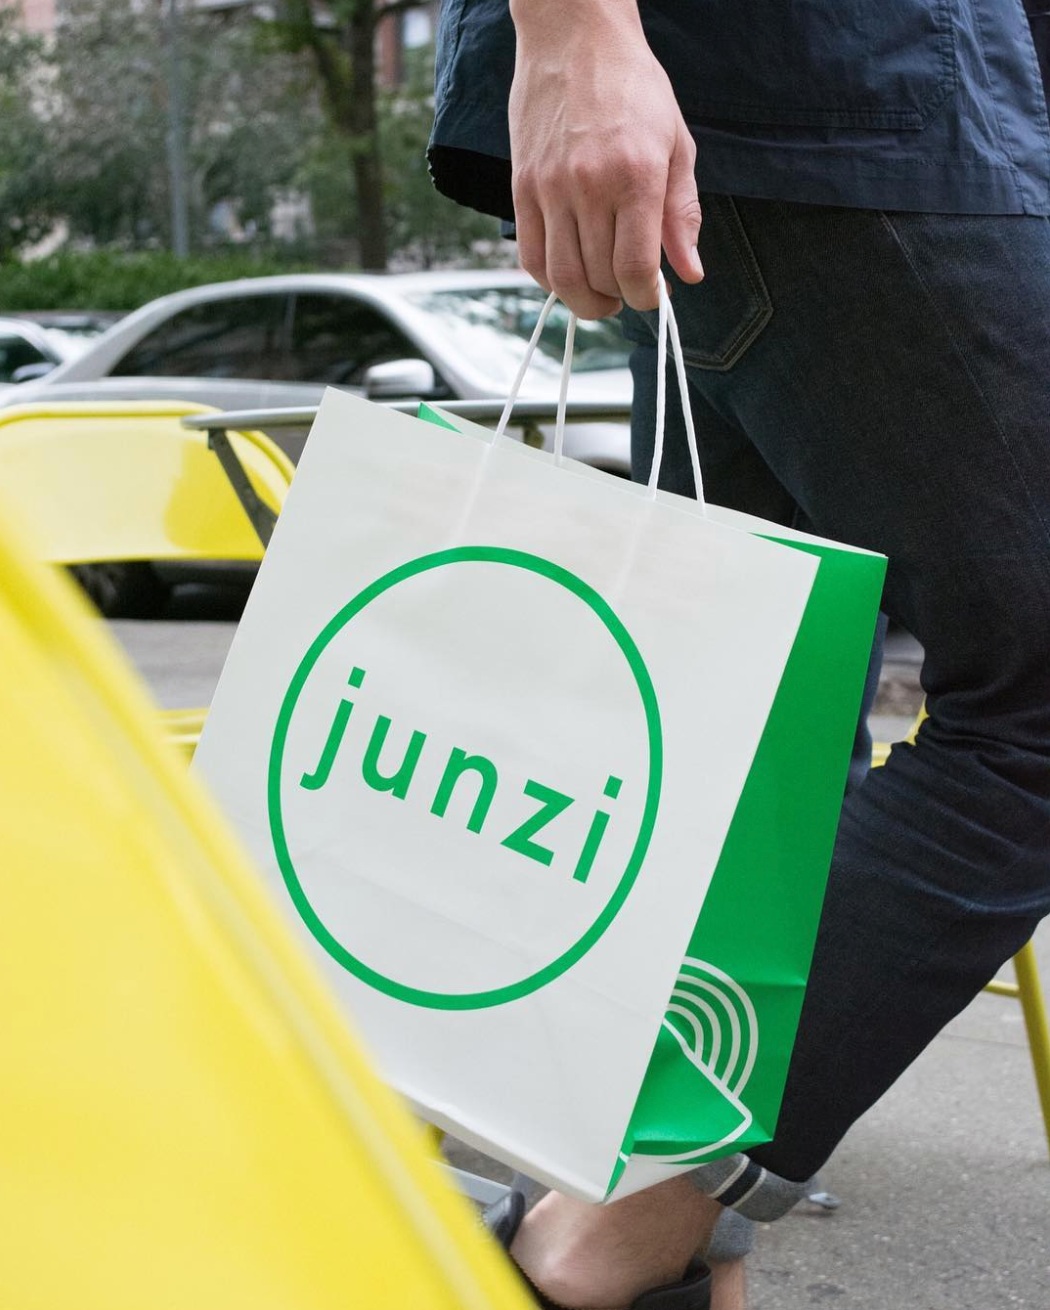  “Going out tonight?🕺Be sure to bring some bings &amp; noodles along.🤤Order online for pickup at junzi.kitchen/order.” 